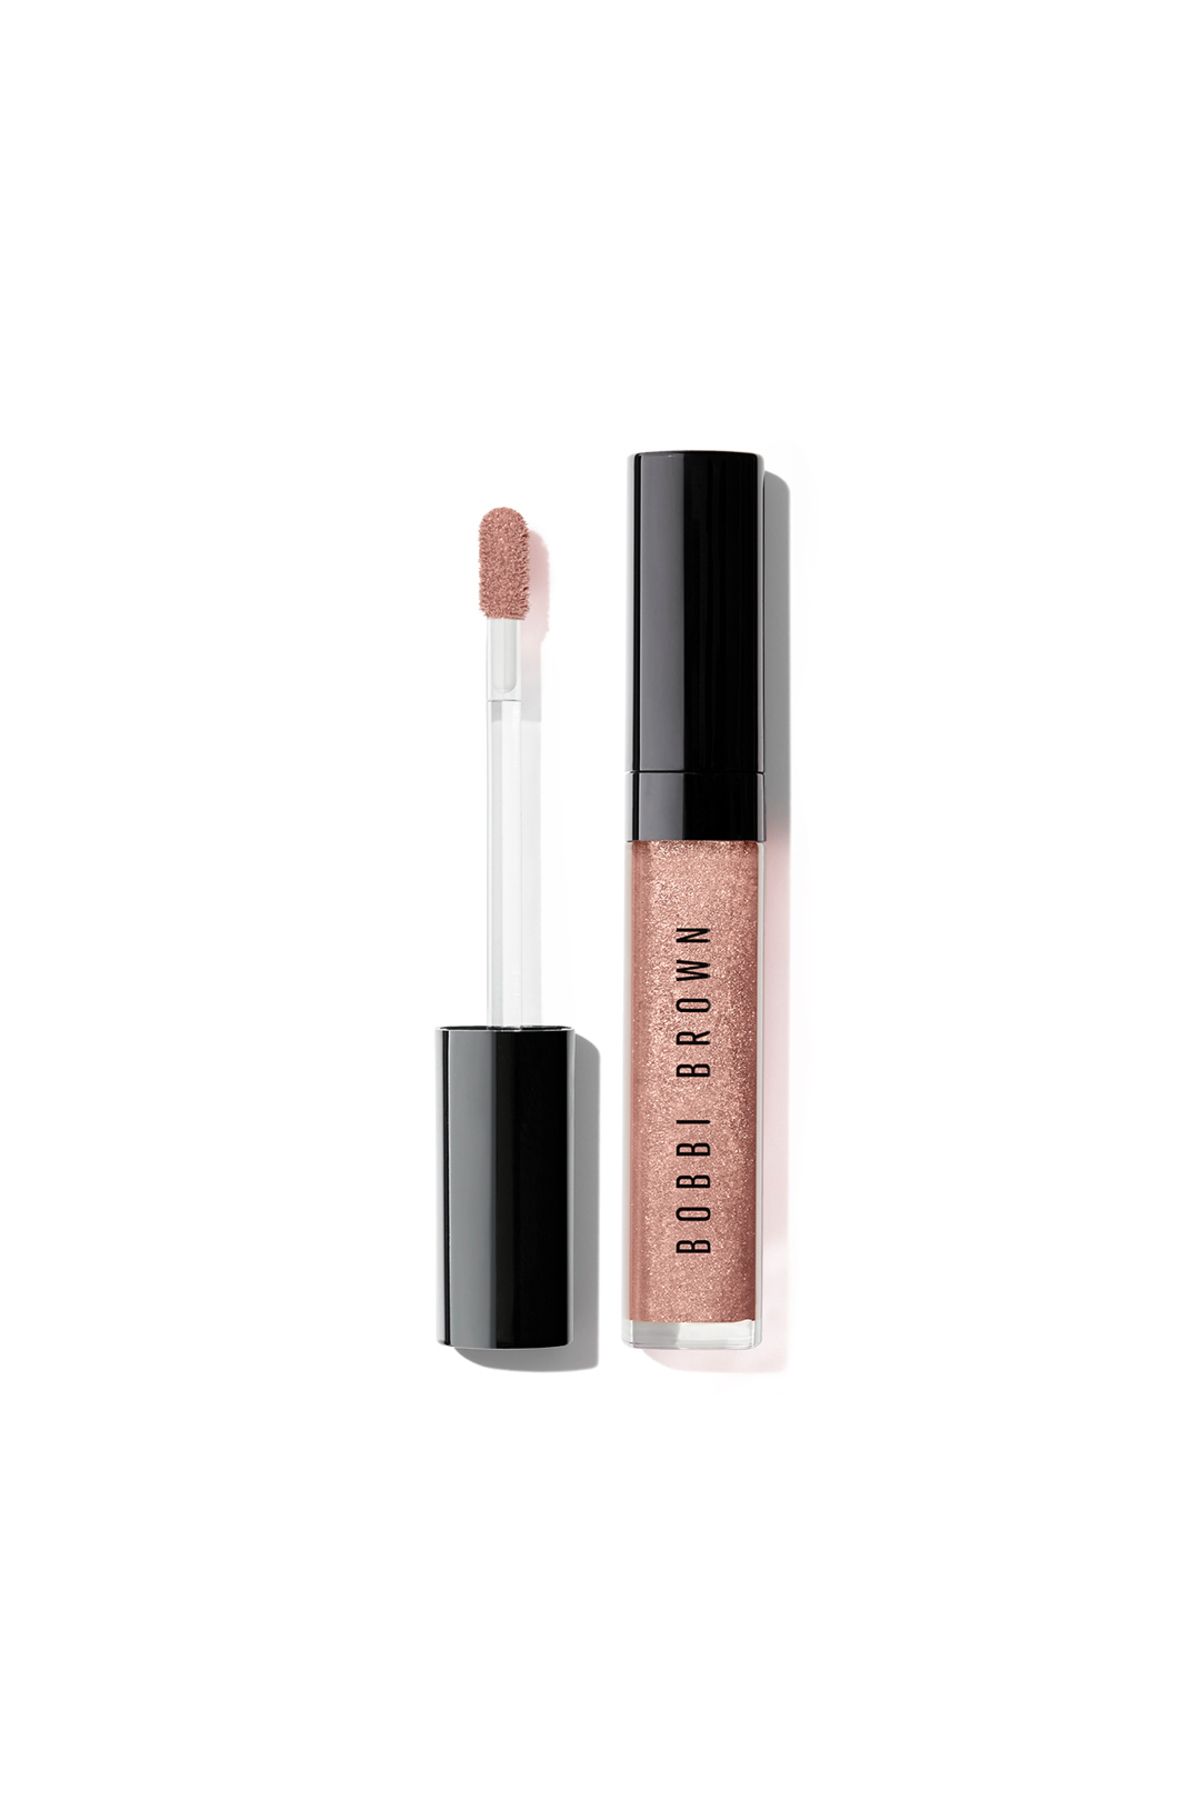 Bobbi Brown CRUSHED OİL-İNFUSED GLOSS SHİMMER - BARE SPARKLE 6ML PSSN1548